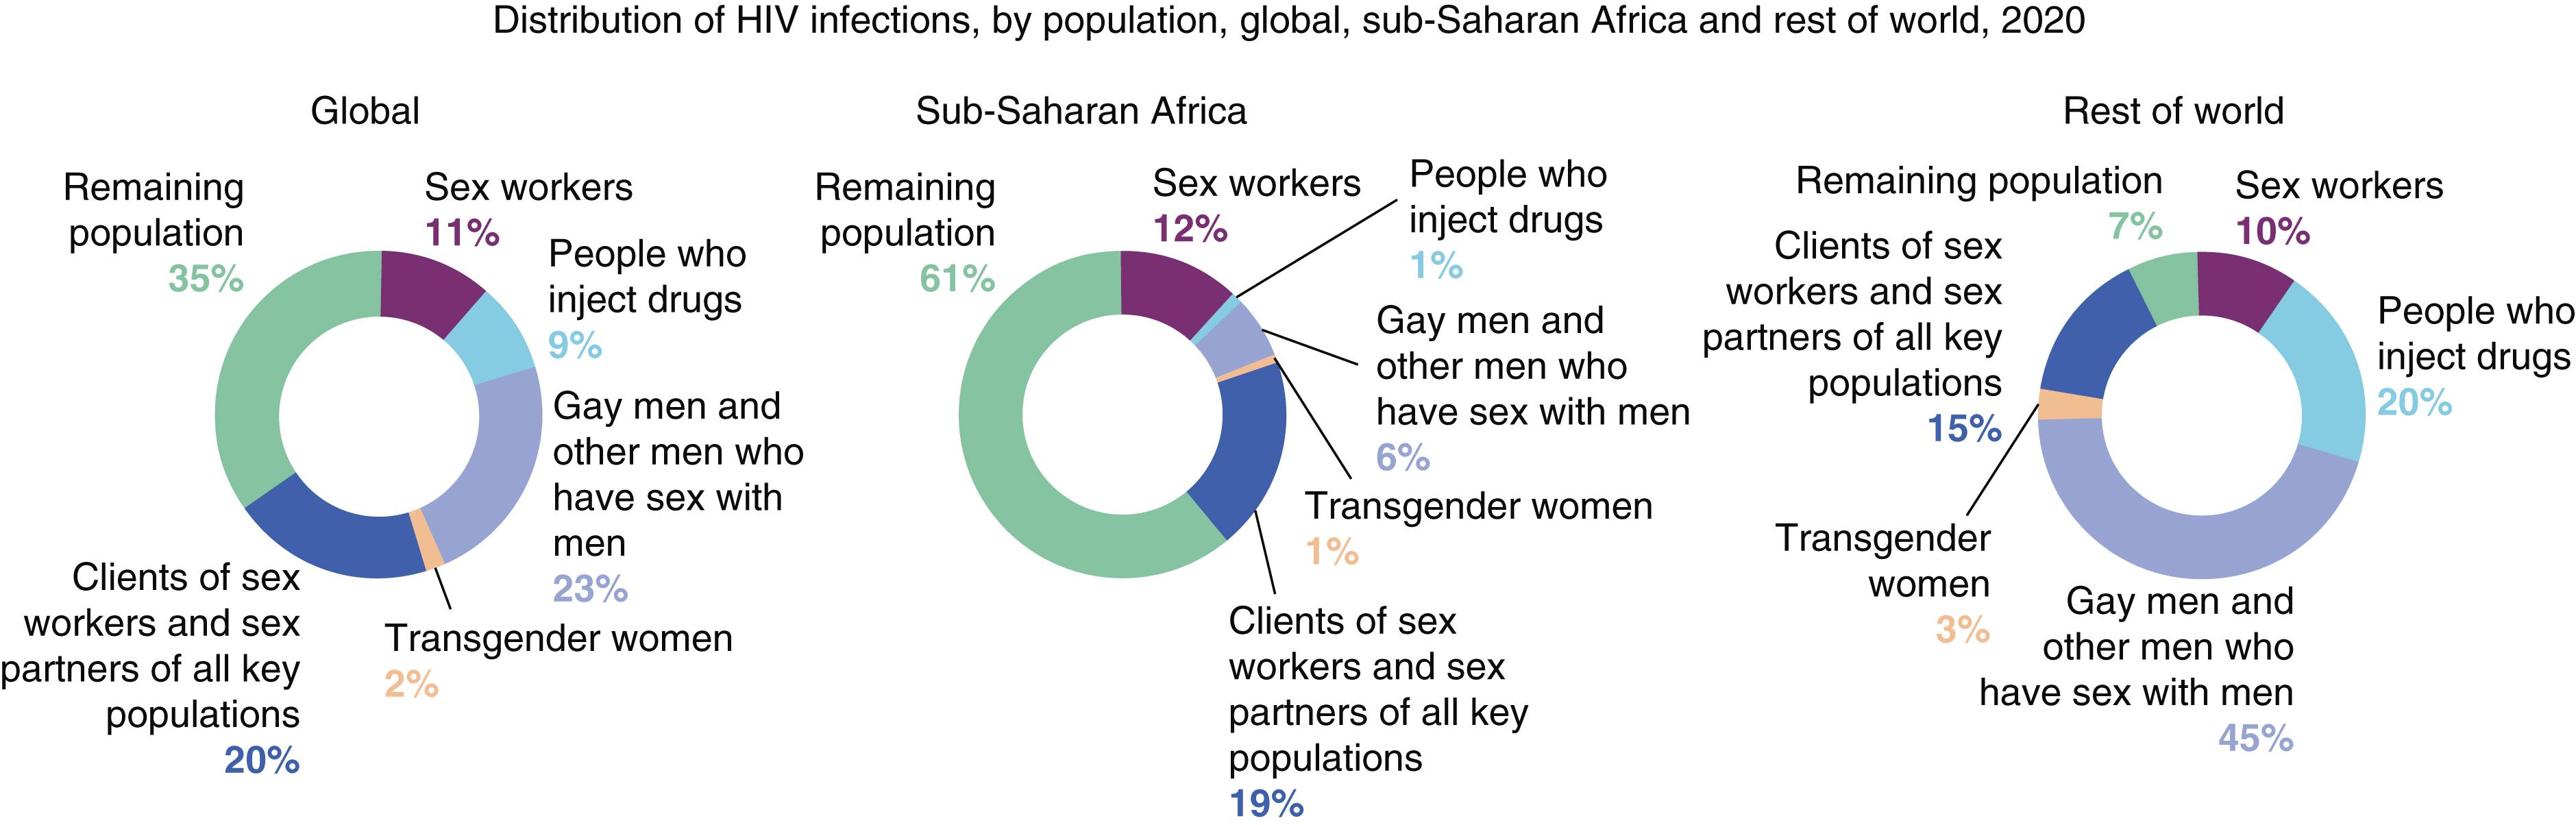 E-FIGURE 353-2, Distribution of human immunodeficiency virus (HIV) infections including key populations, 2020.